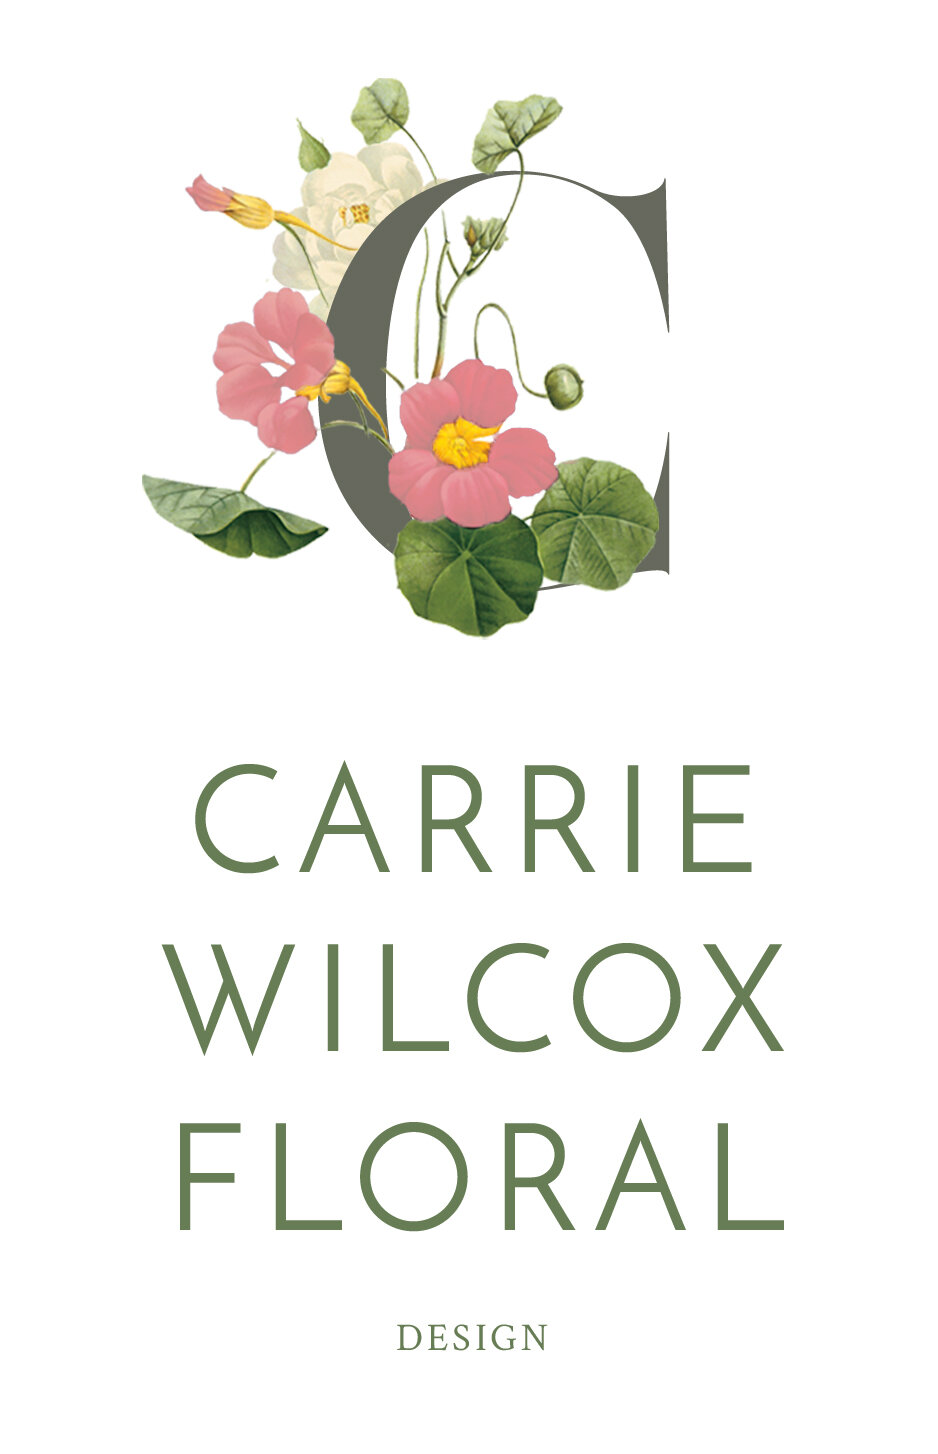 Carrie Wilcox Floral Design